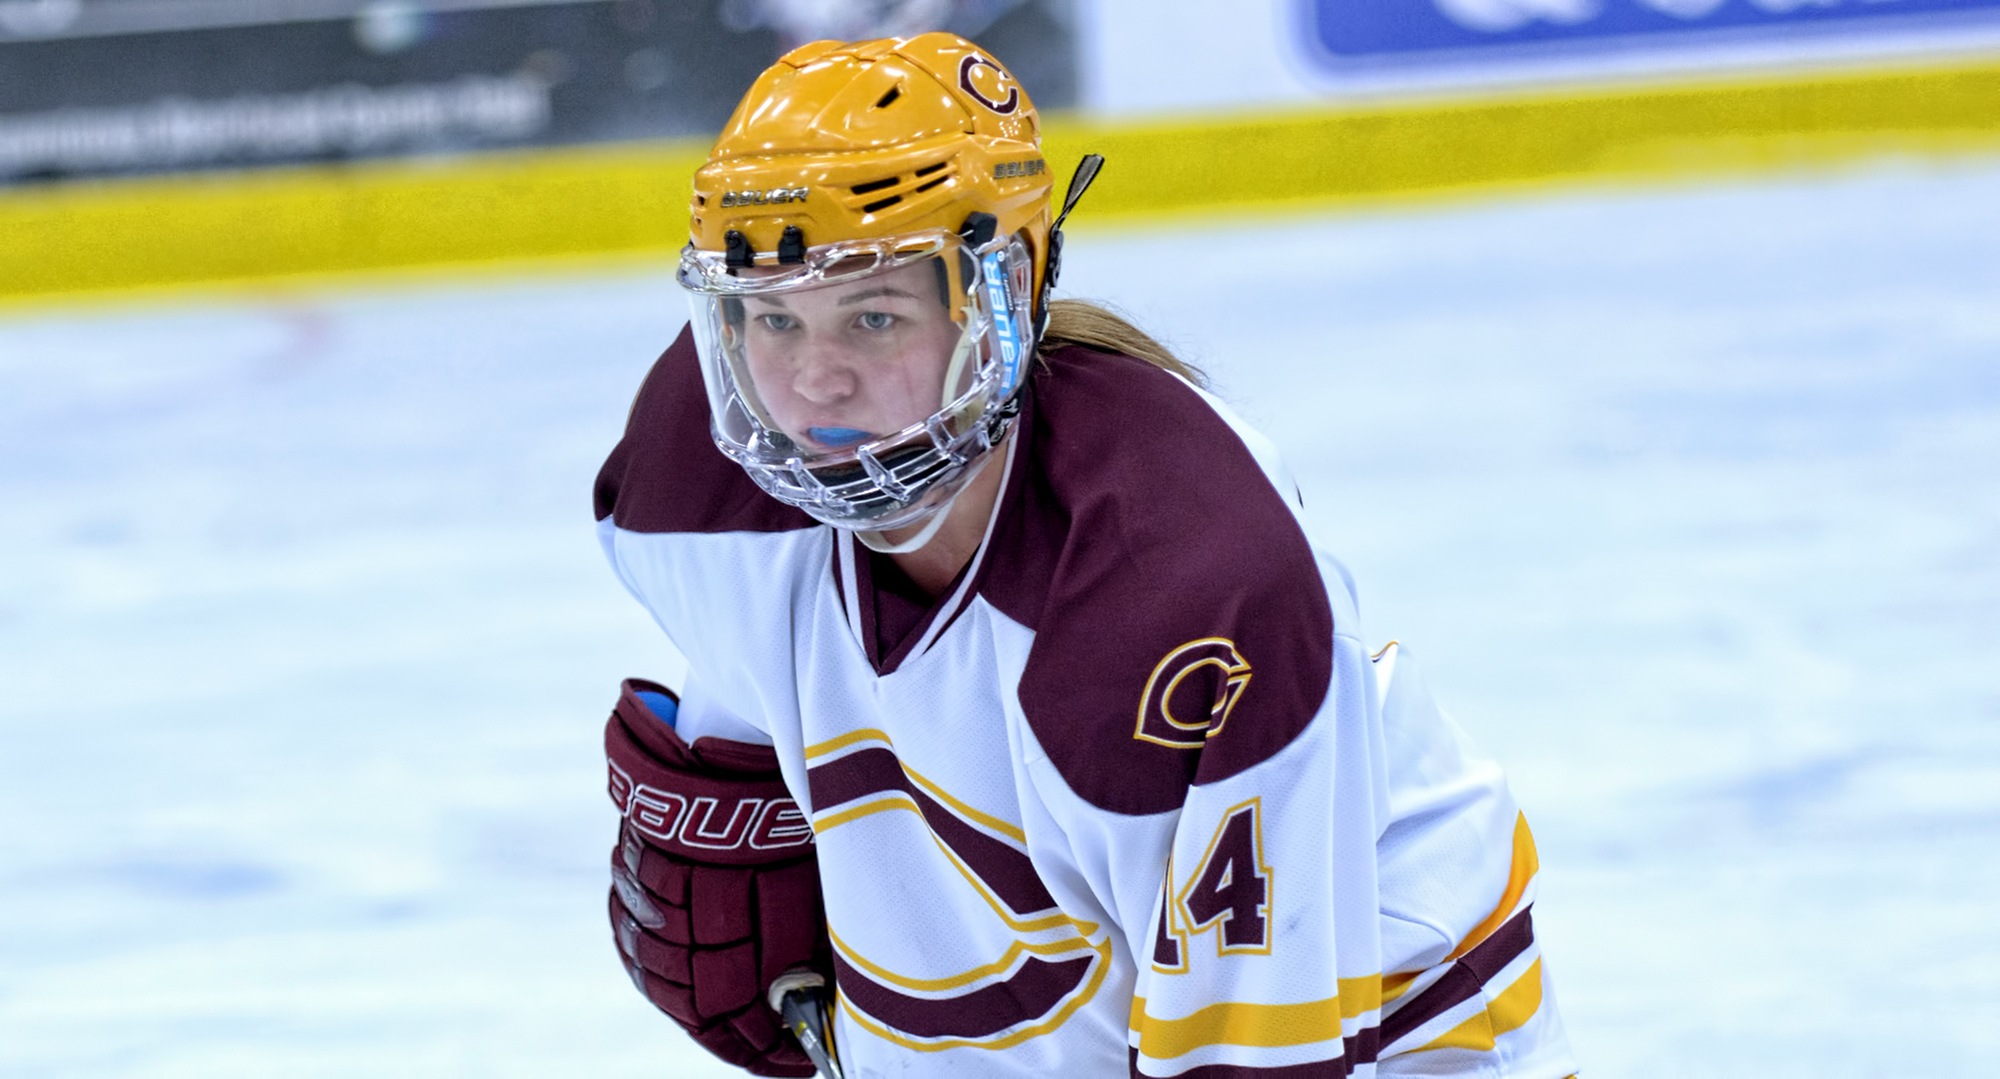 Freshman Callie Fagerstrom scored the game-winning goal in the Cobbers' 3-1 win over St. Catherine.